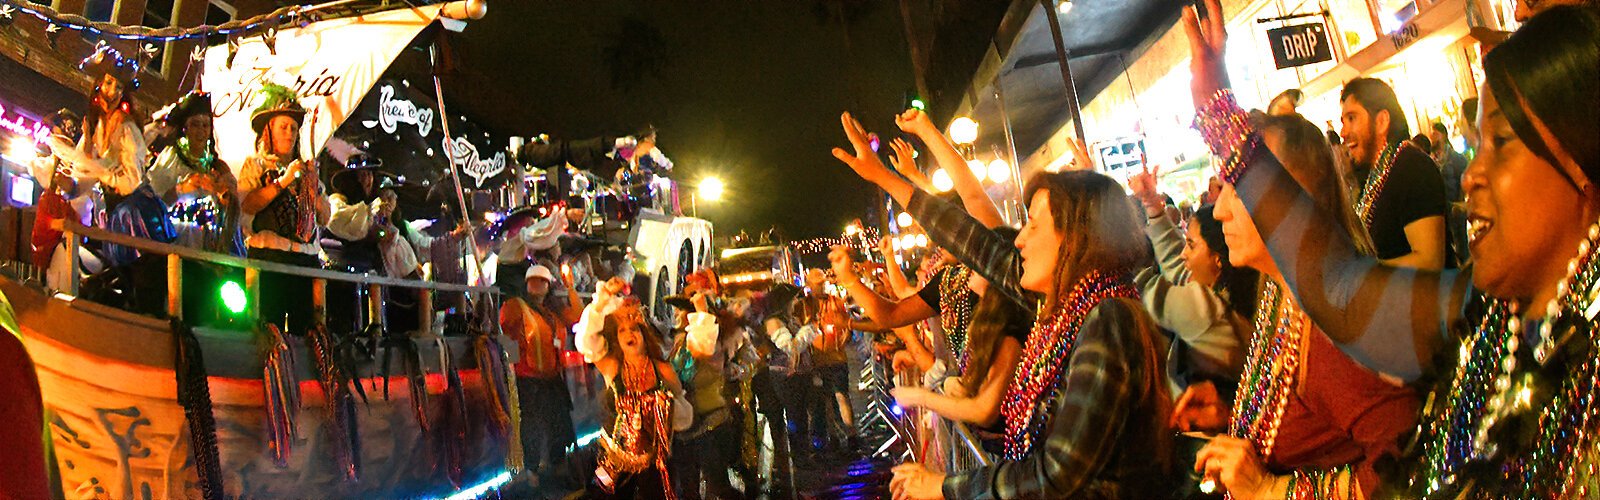 Spectators cheer the Krewe of Alegria, Tampa Bay’s first all-female Gasparilla krewe, established in 1986 and comprised of professional women from the Tampa Bay area.